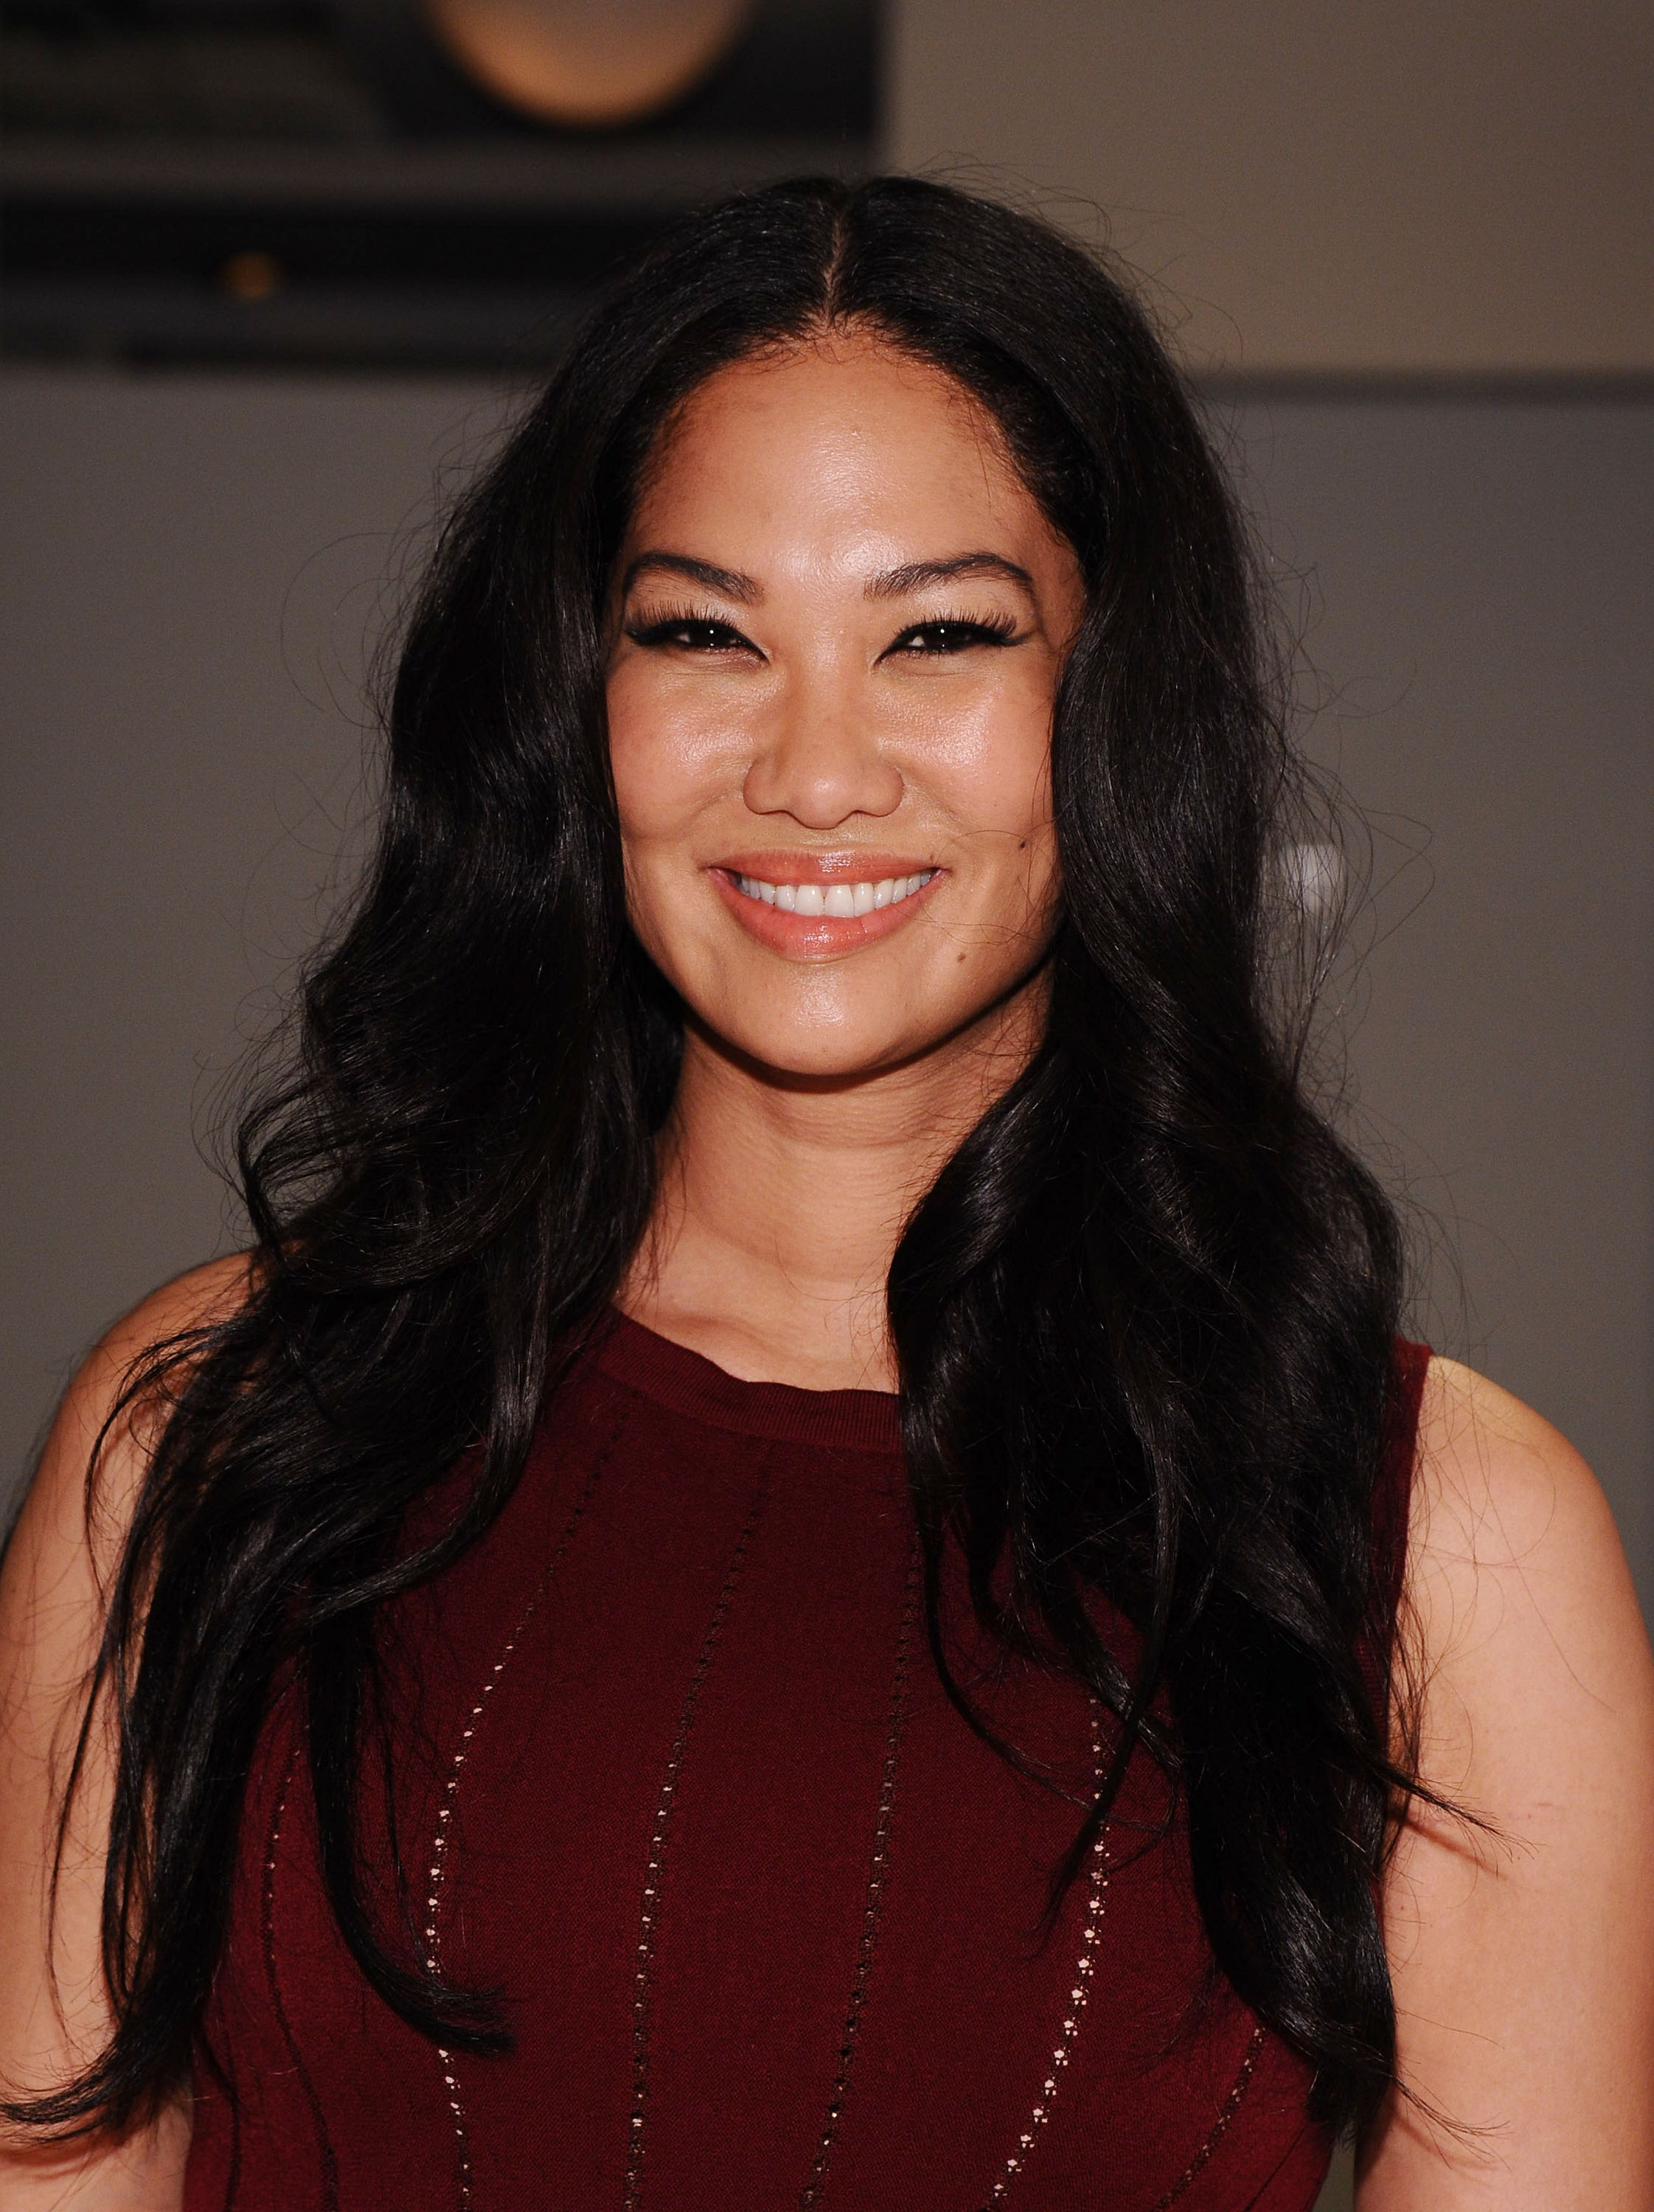 Kimora Lee Simmons at the Argyleculture By Russell Simmons fashion show on Sept. 5, 2014 in New York City | Photo: Getty Images